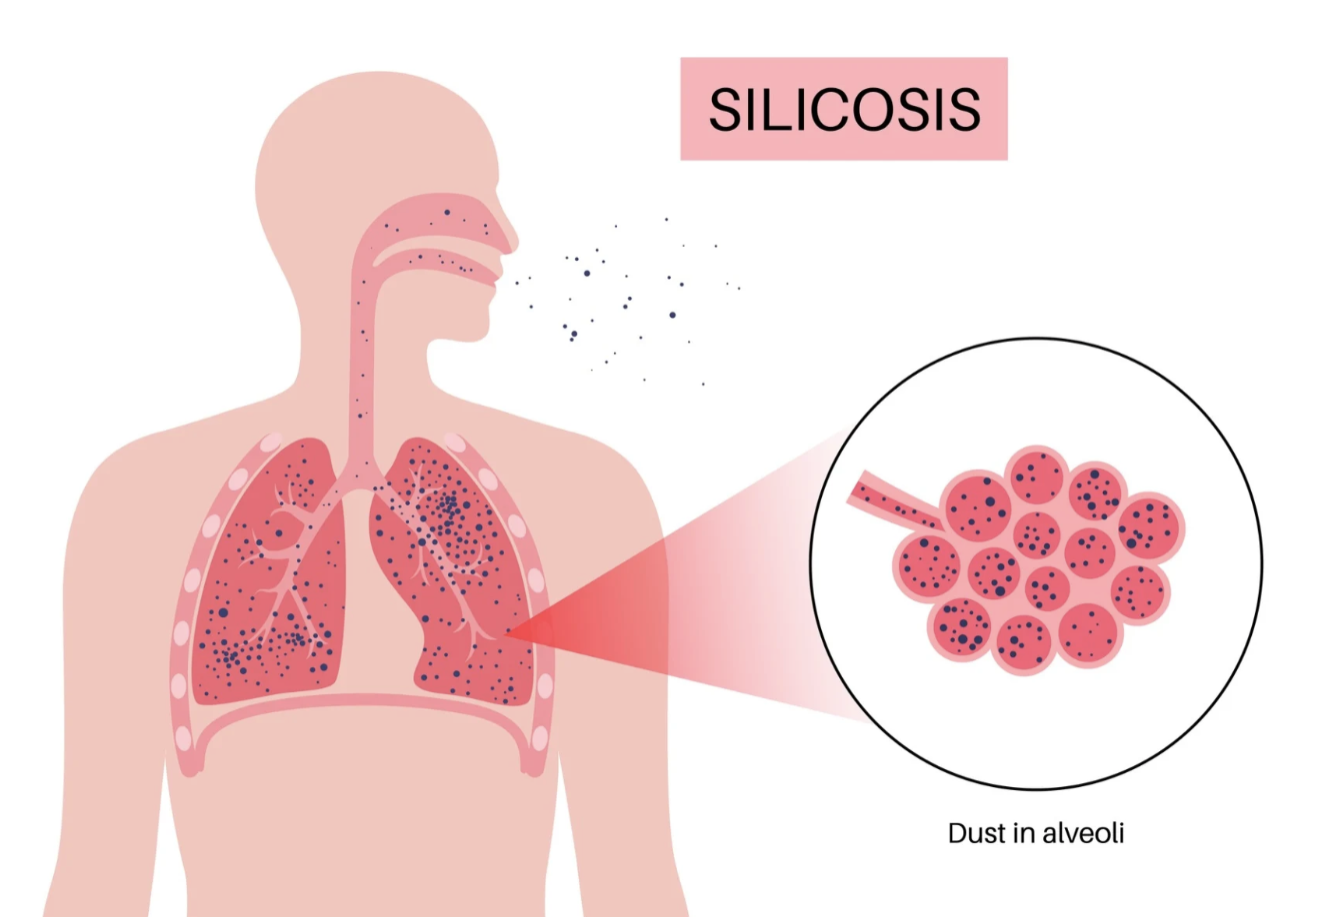 Graphic showing human figure with lungs, and what silicosis looks like